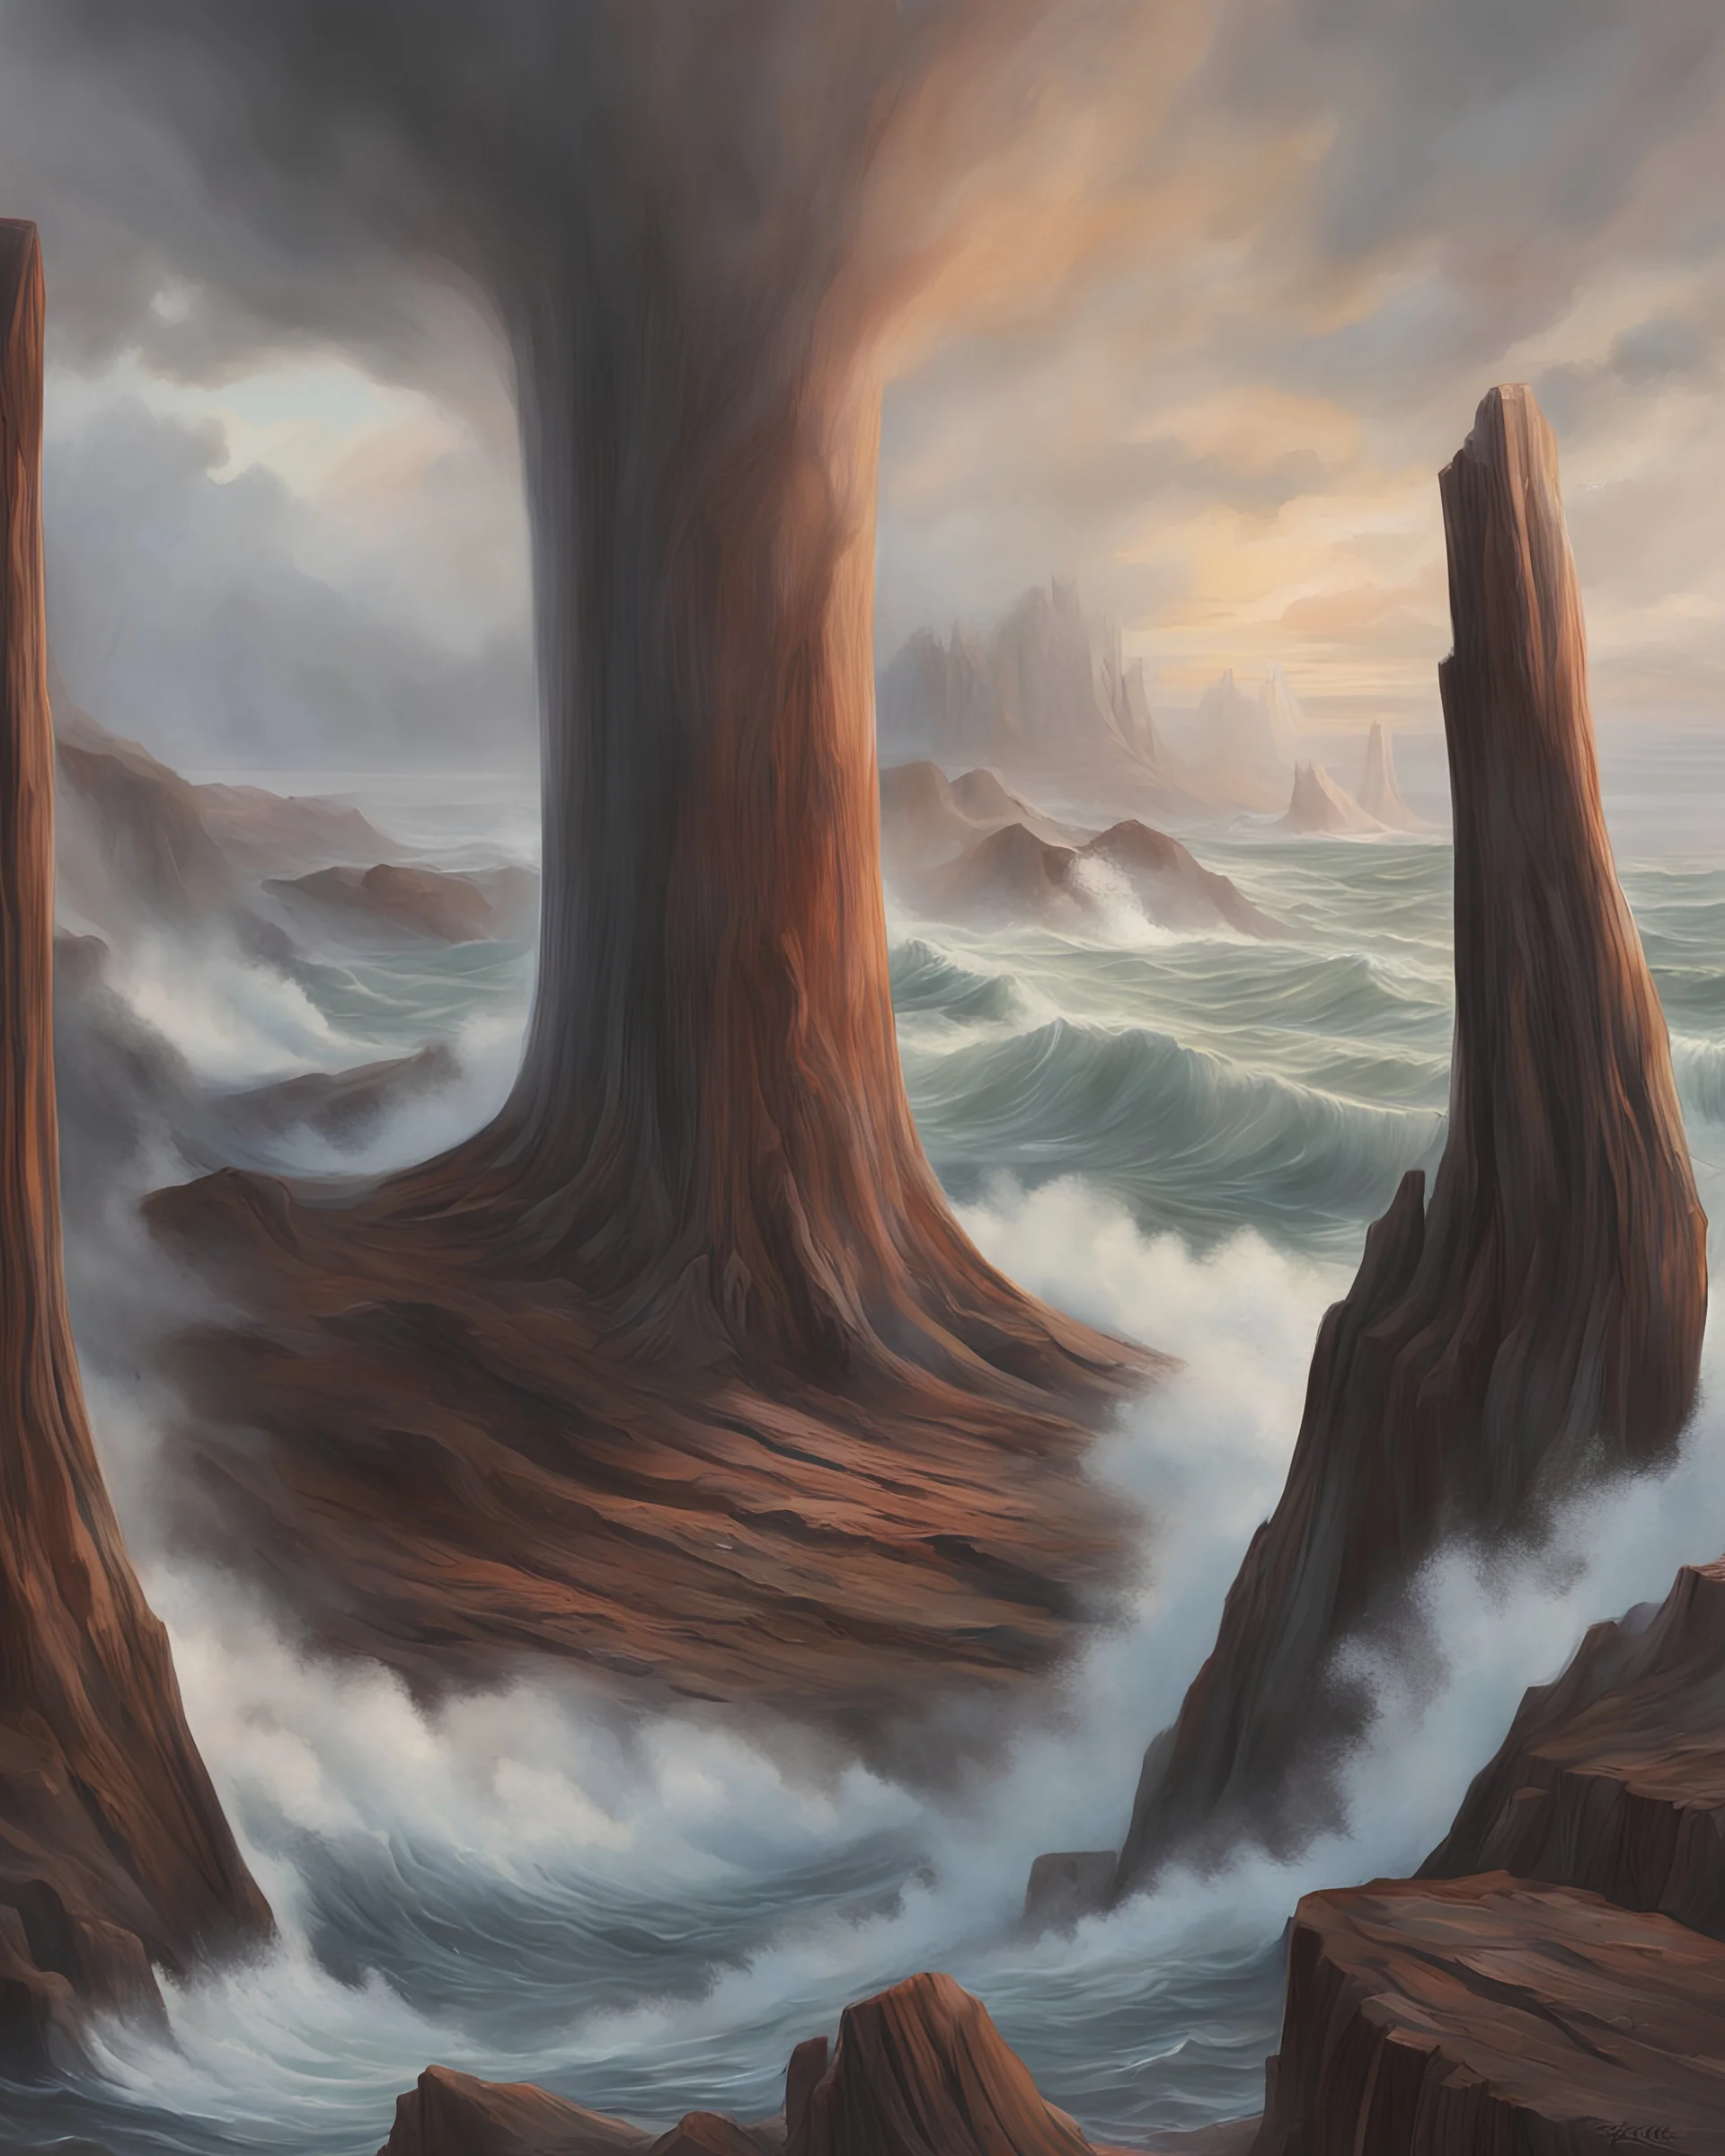 the base of a great redwood tree trunk takes up the majority of the screen. It is very important that this is as photorealistic to a redwood as possible. It is surrounded by ocean, which pours into the center of the charred wooden flesh. There are no mountains or other trees surrounding it, and there are no leaves. The background is the storming sea, churning and swirling, almost gracefully, but definitely powerfully and terrifyingly towards the treetrunk and flowing down into its center.